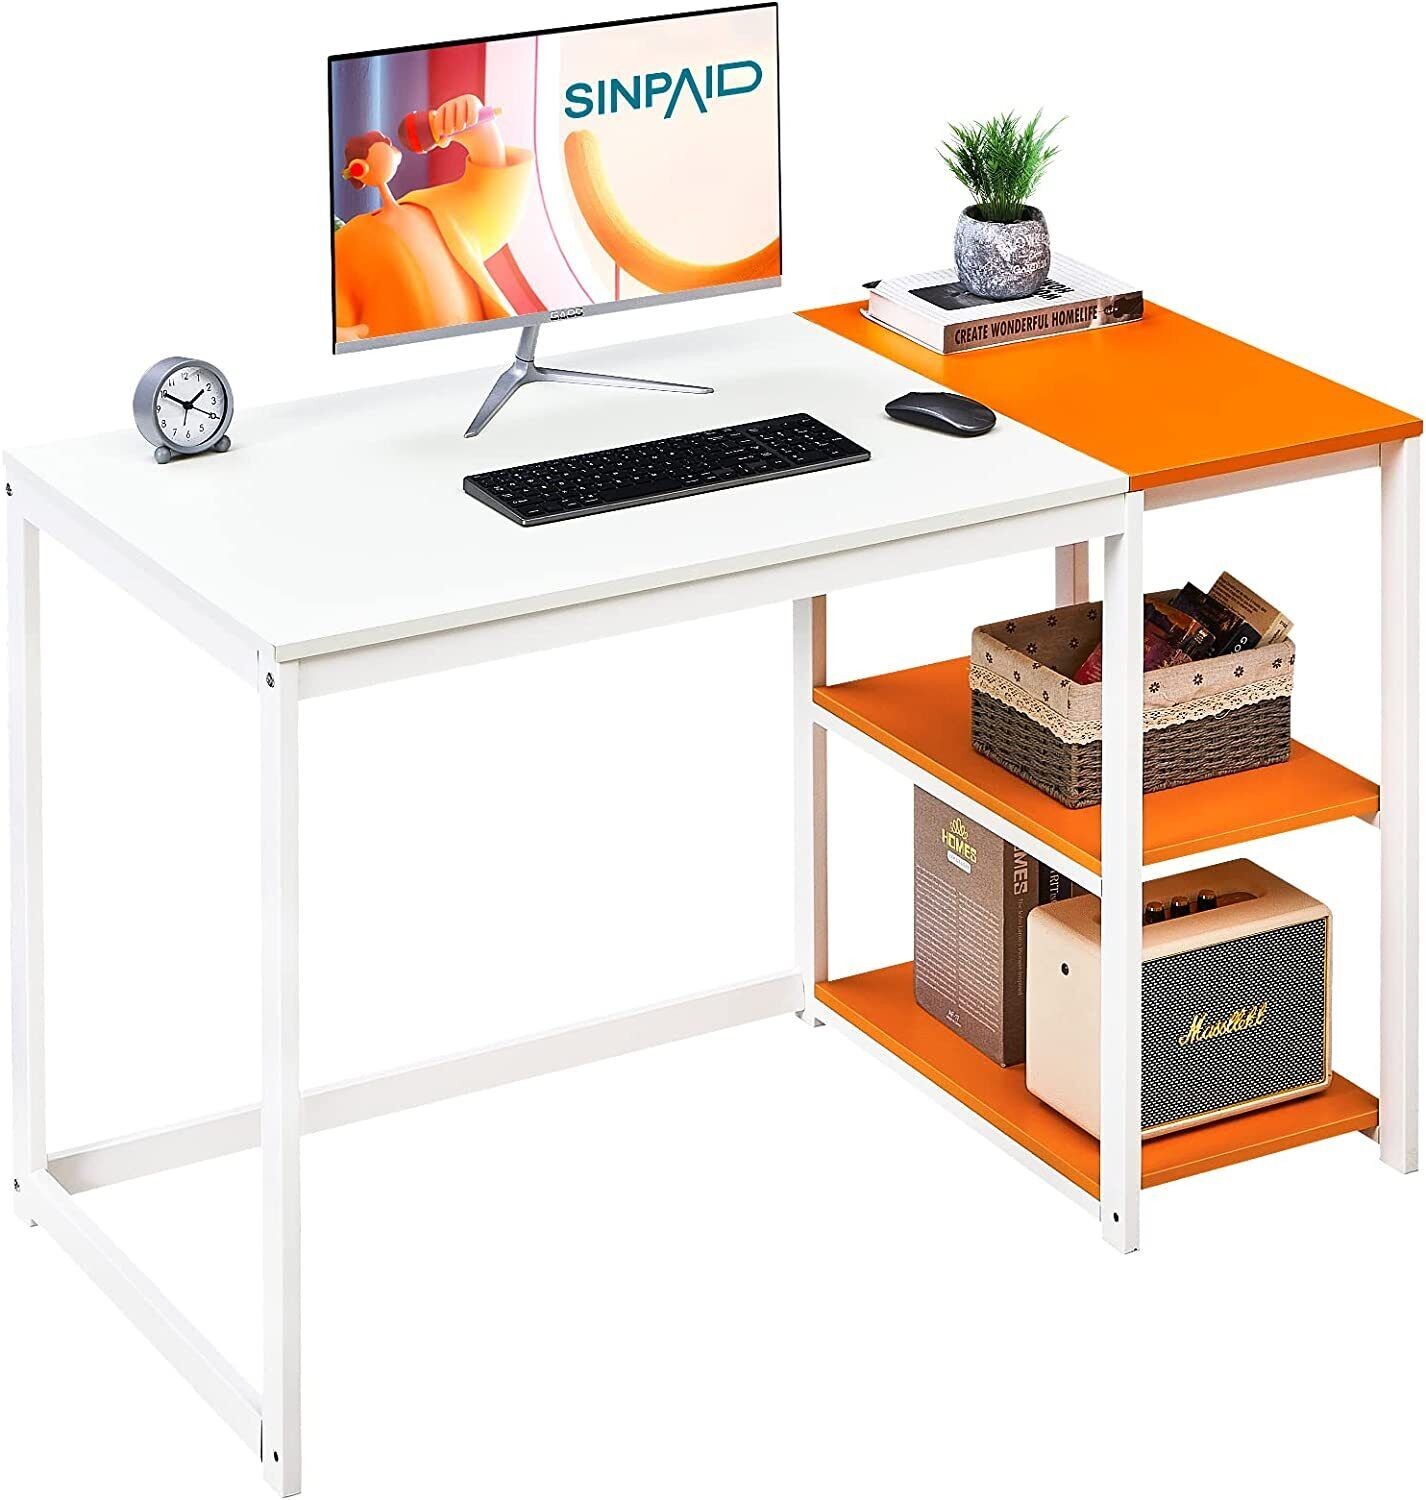 SINPAID Computer Desk 40 inches with 2-Tier Shelves - White&Orange